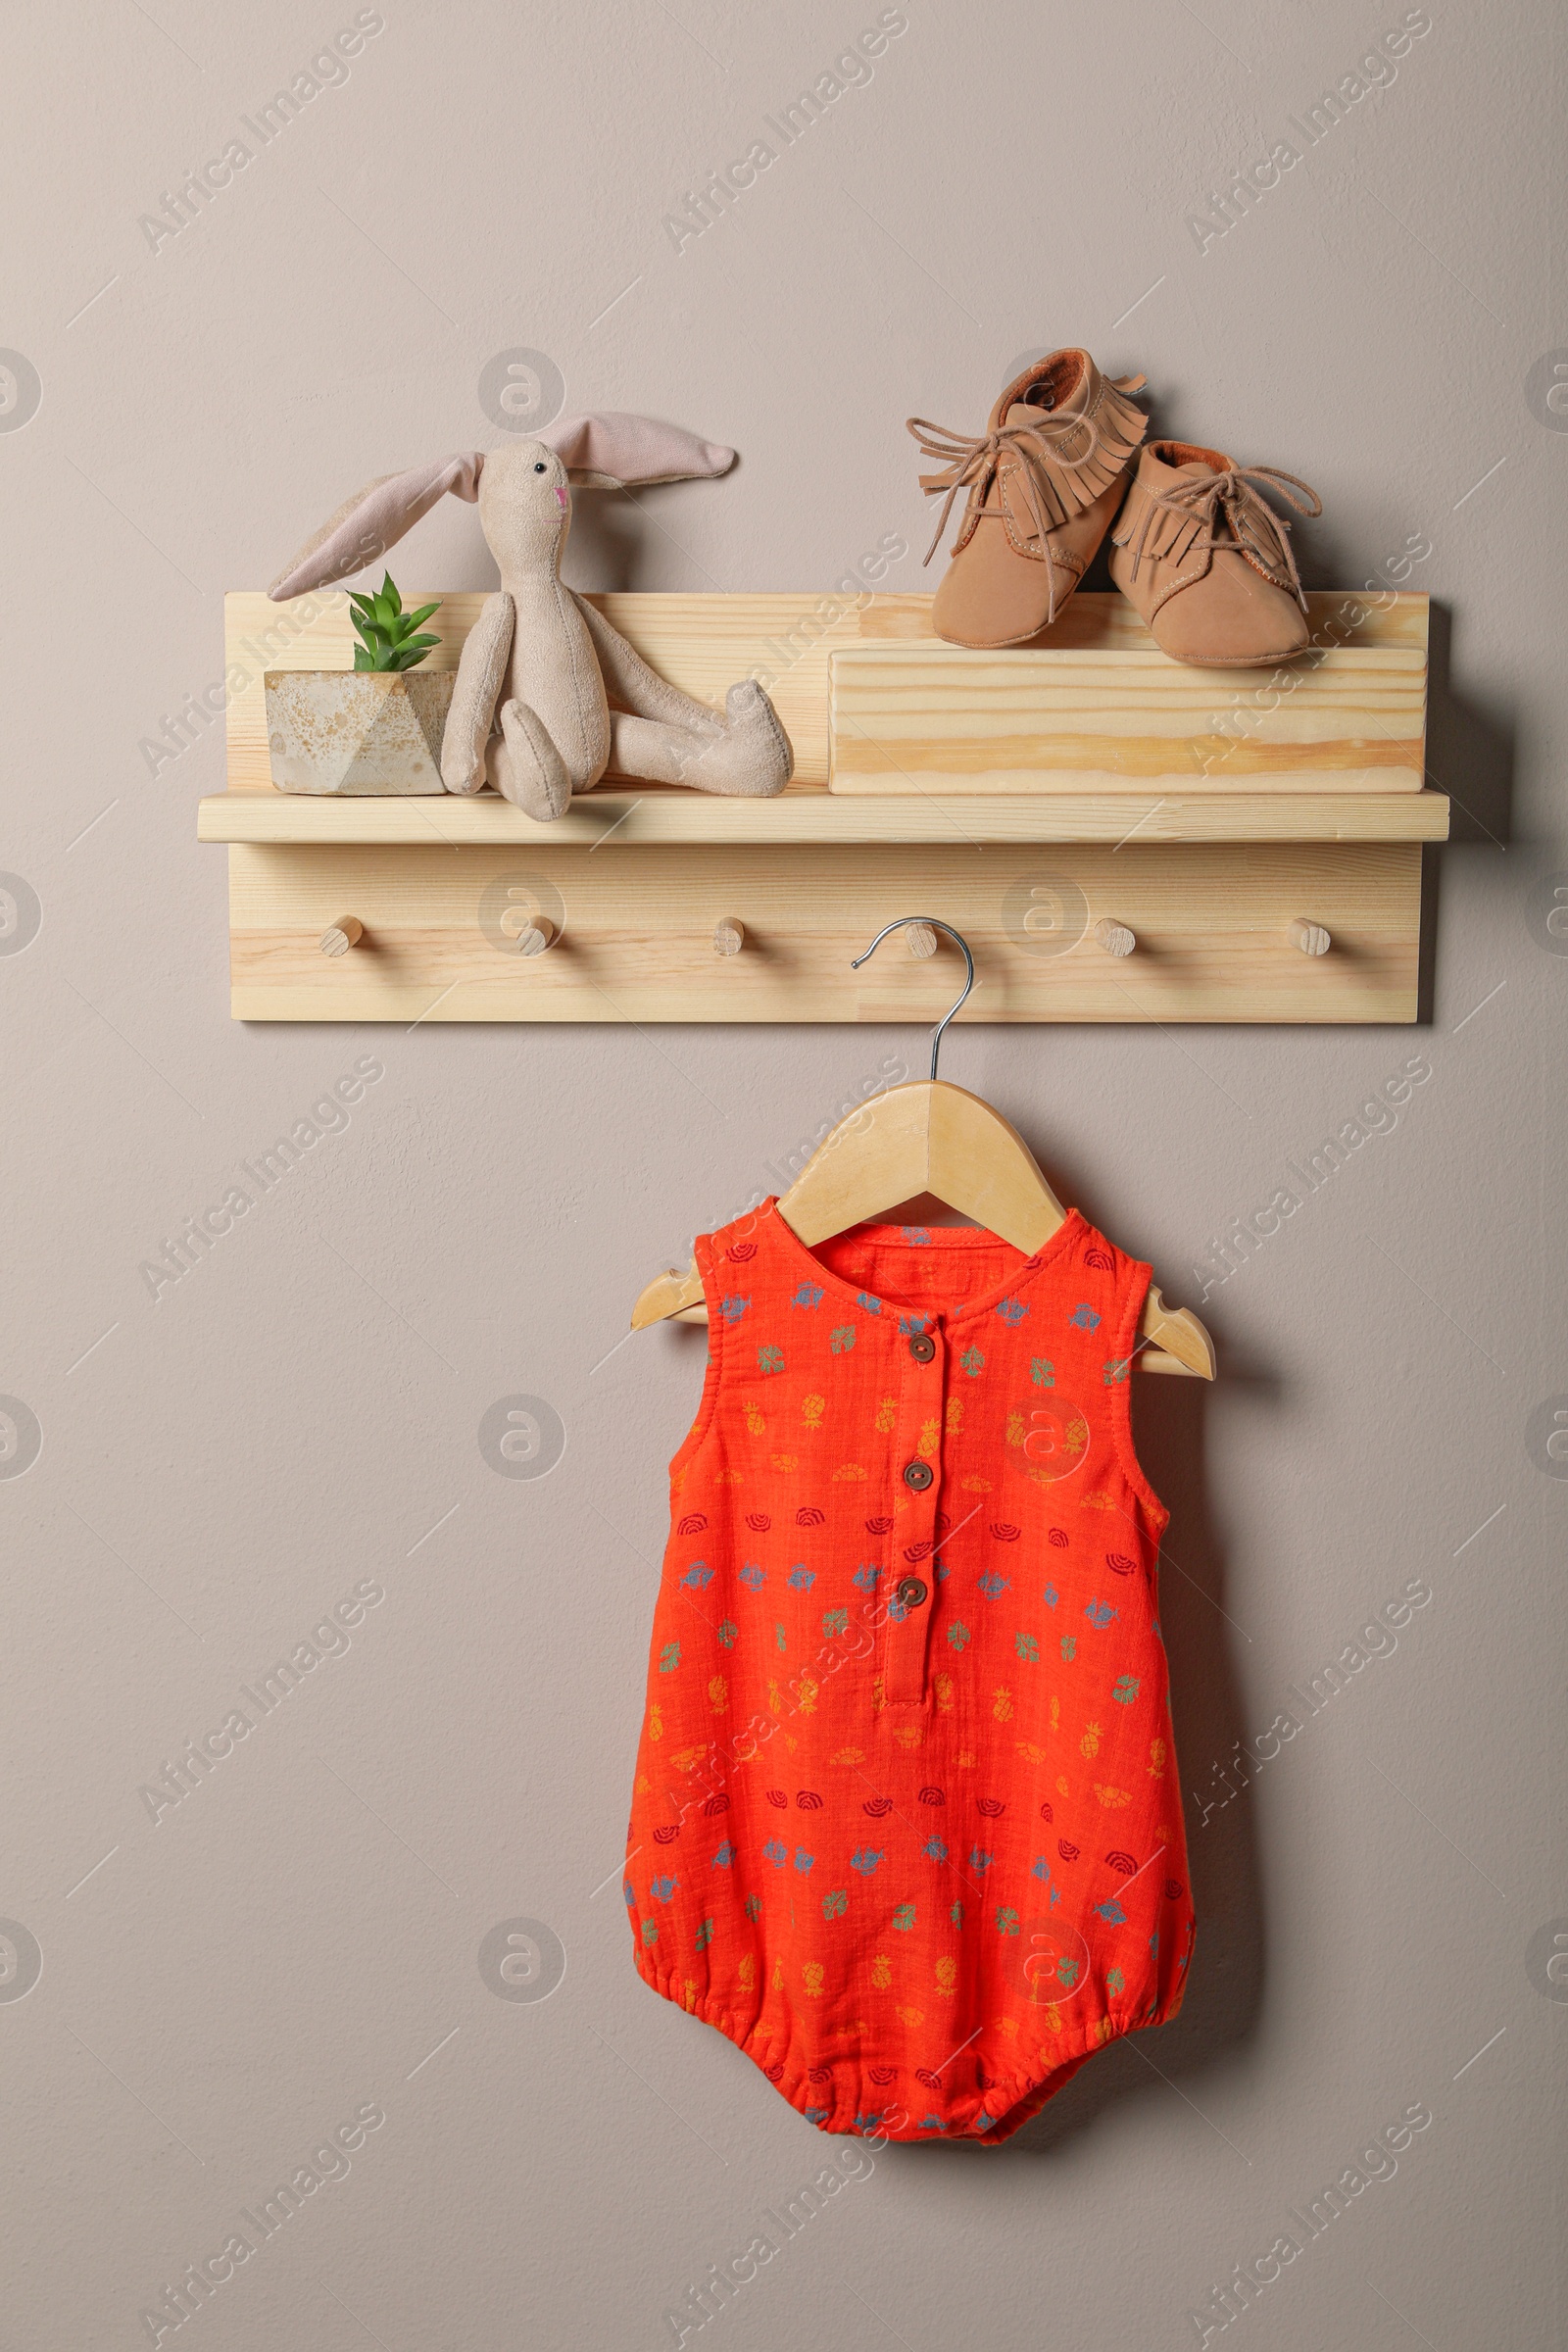 Photo of Baby bodysuit, booties and toy on wooden rack